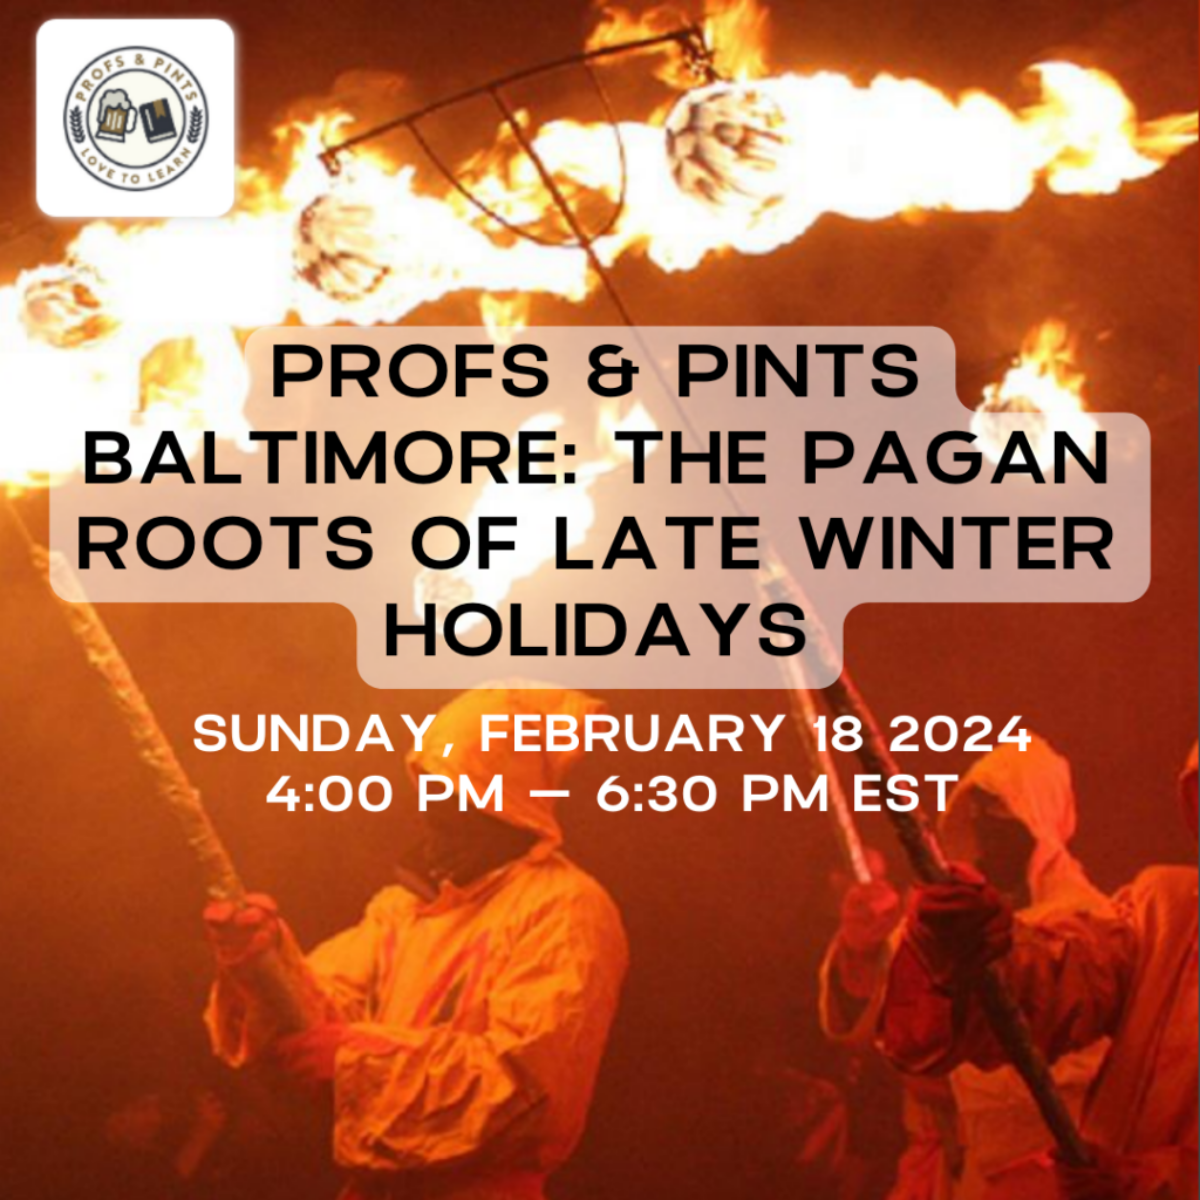 Profs & Pints: Pagan Roots of Late Winter Holidays Flyer